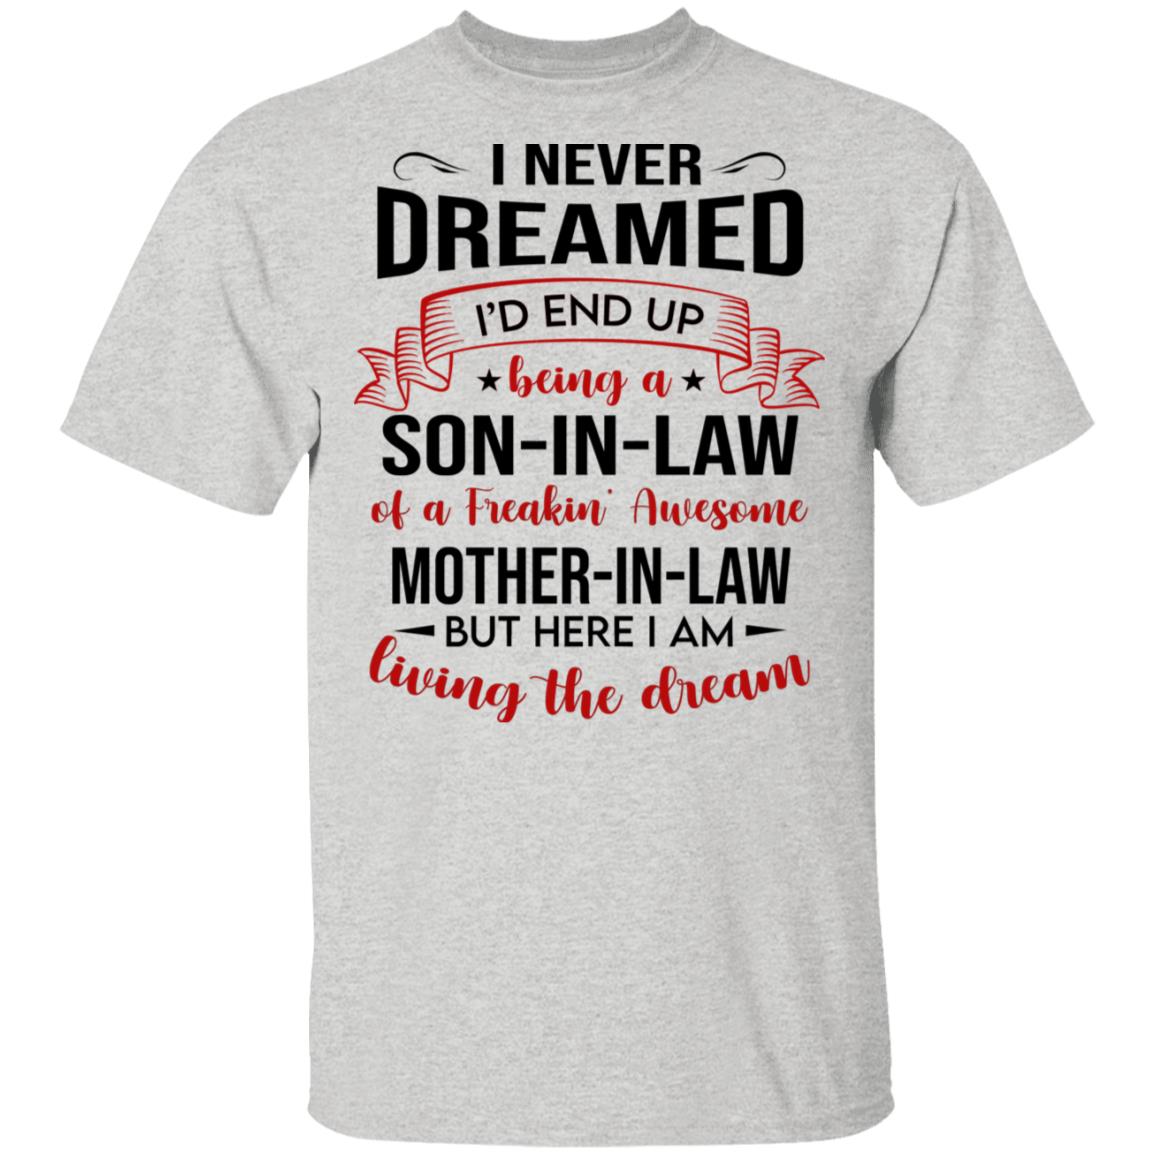 Awesome Being A Son Son In Law Birthday Gift Awesome Mother In Law T-Shirt I Never Dreamed Son In Law Of Freaking Mother In Law T-Shirt